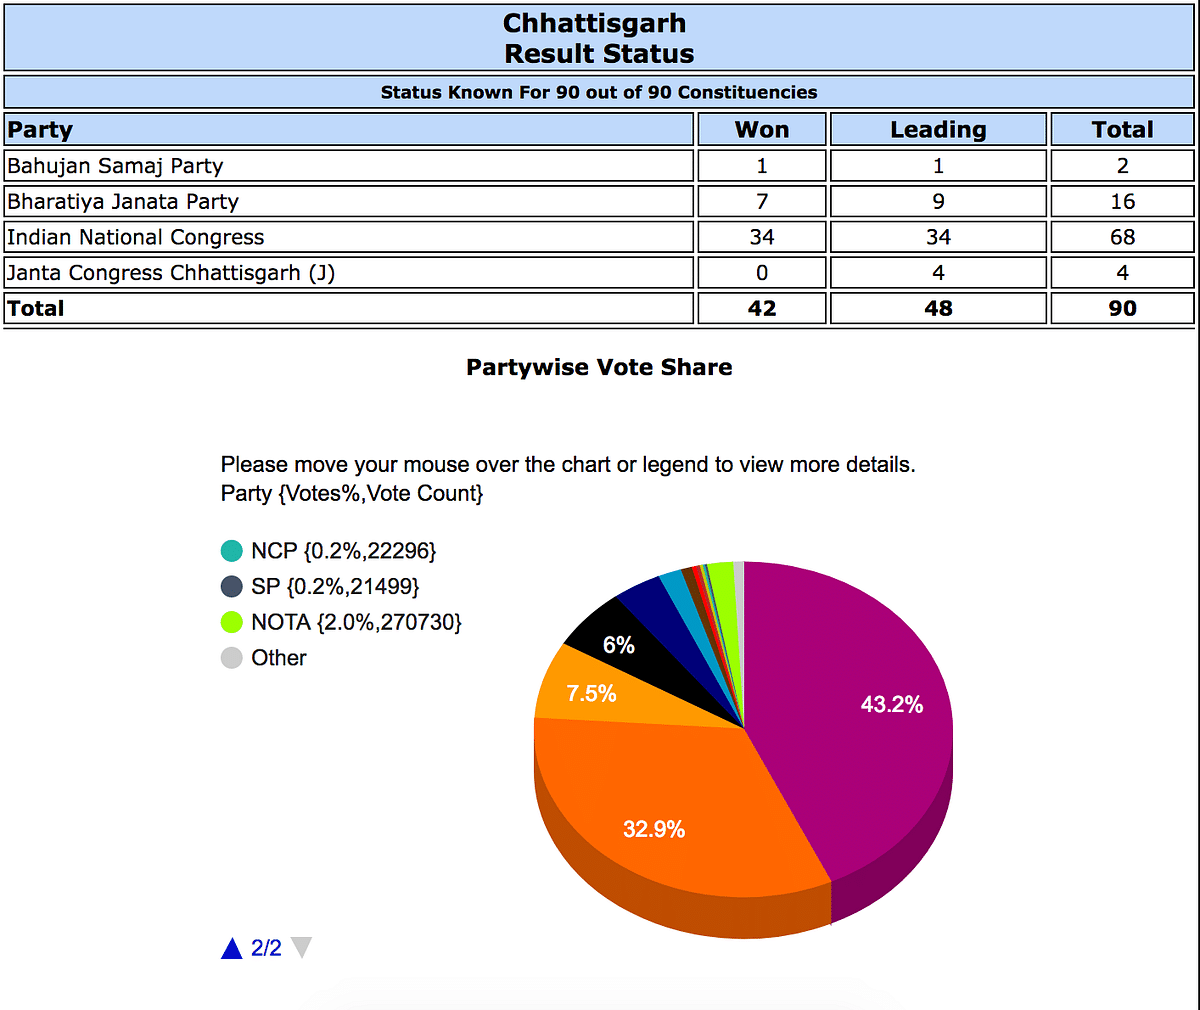 Here is the Percentage of Votes to NOTA in each of the 5 States